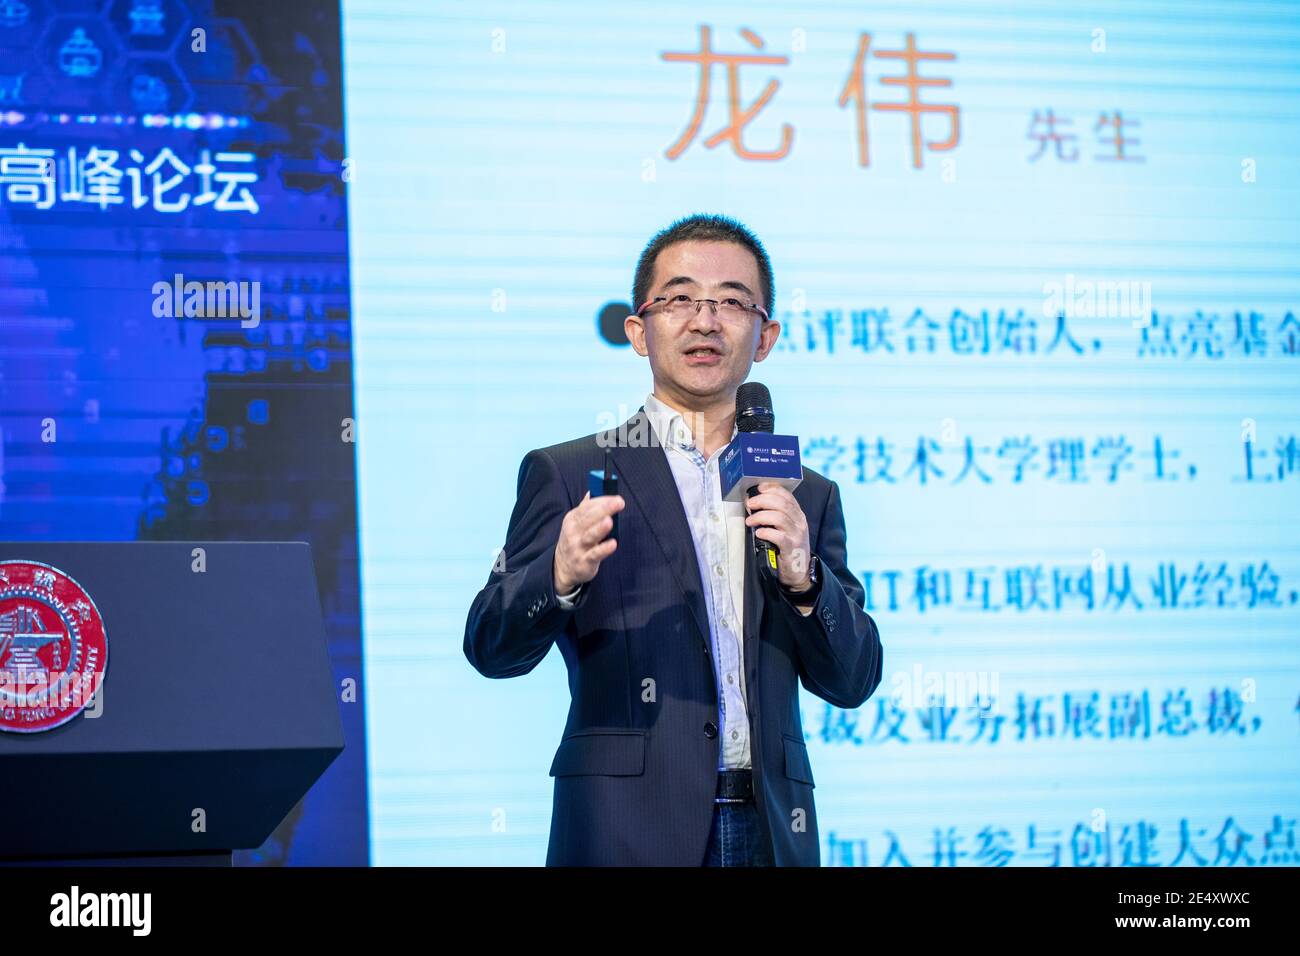 --FILE—Long Wei, one of co-founders of dianping.com, which merges with Meituan now, delivers a speech during a forum held at Shanghai Jiao Tong Univer Stock Photo